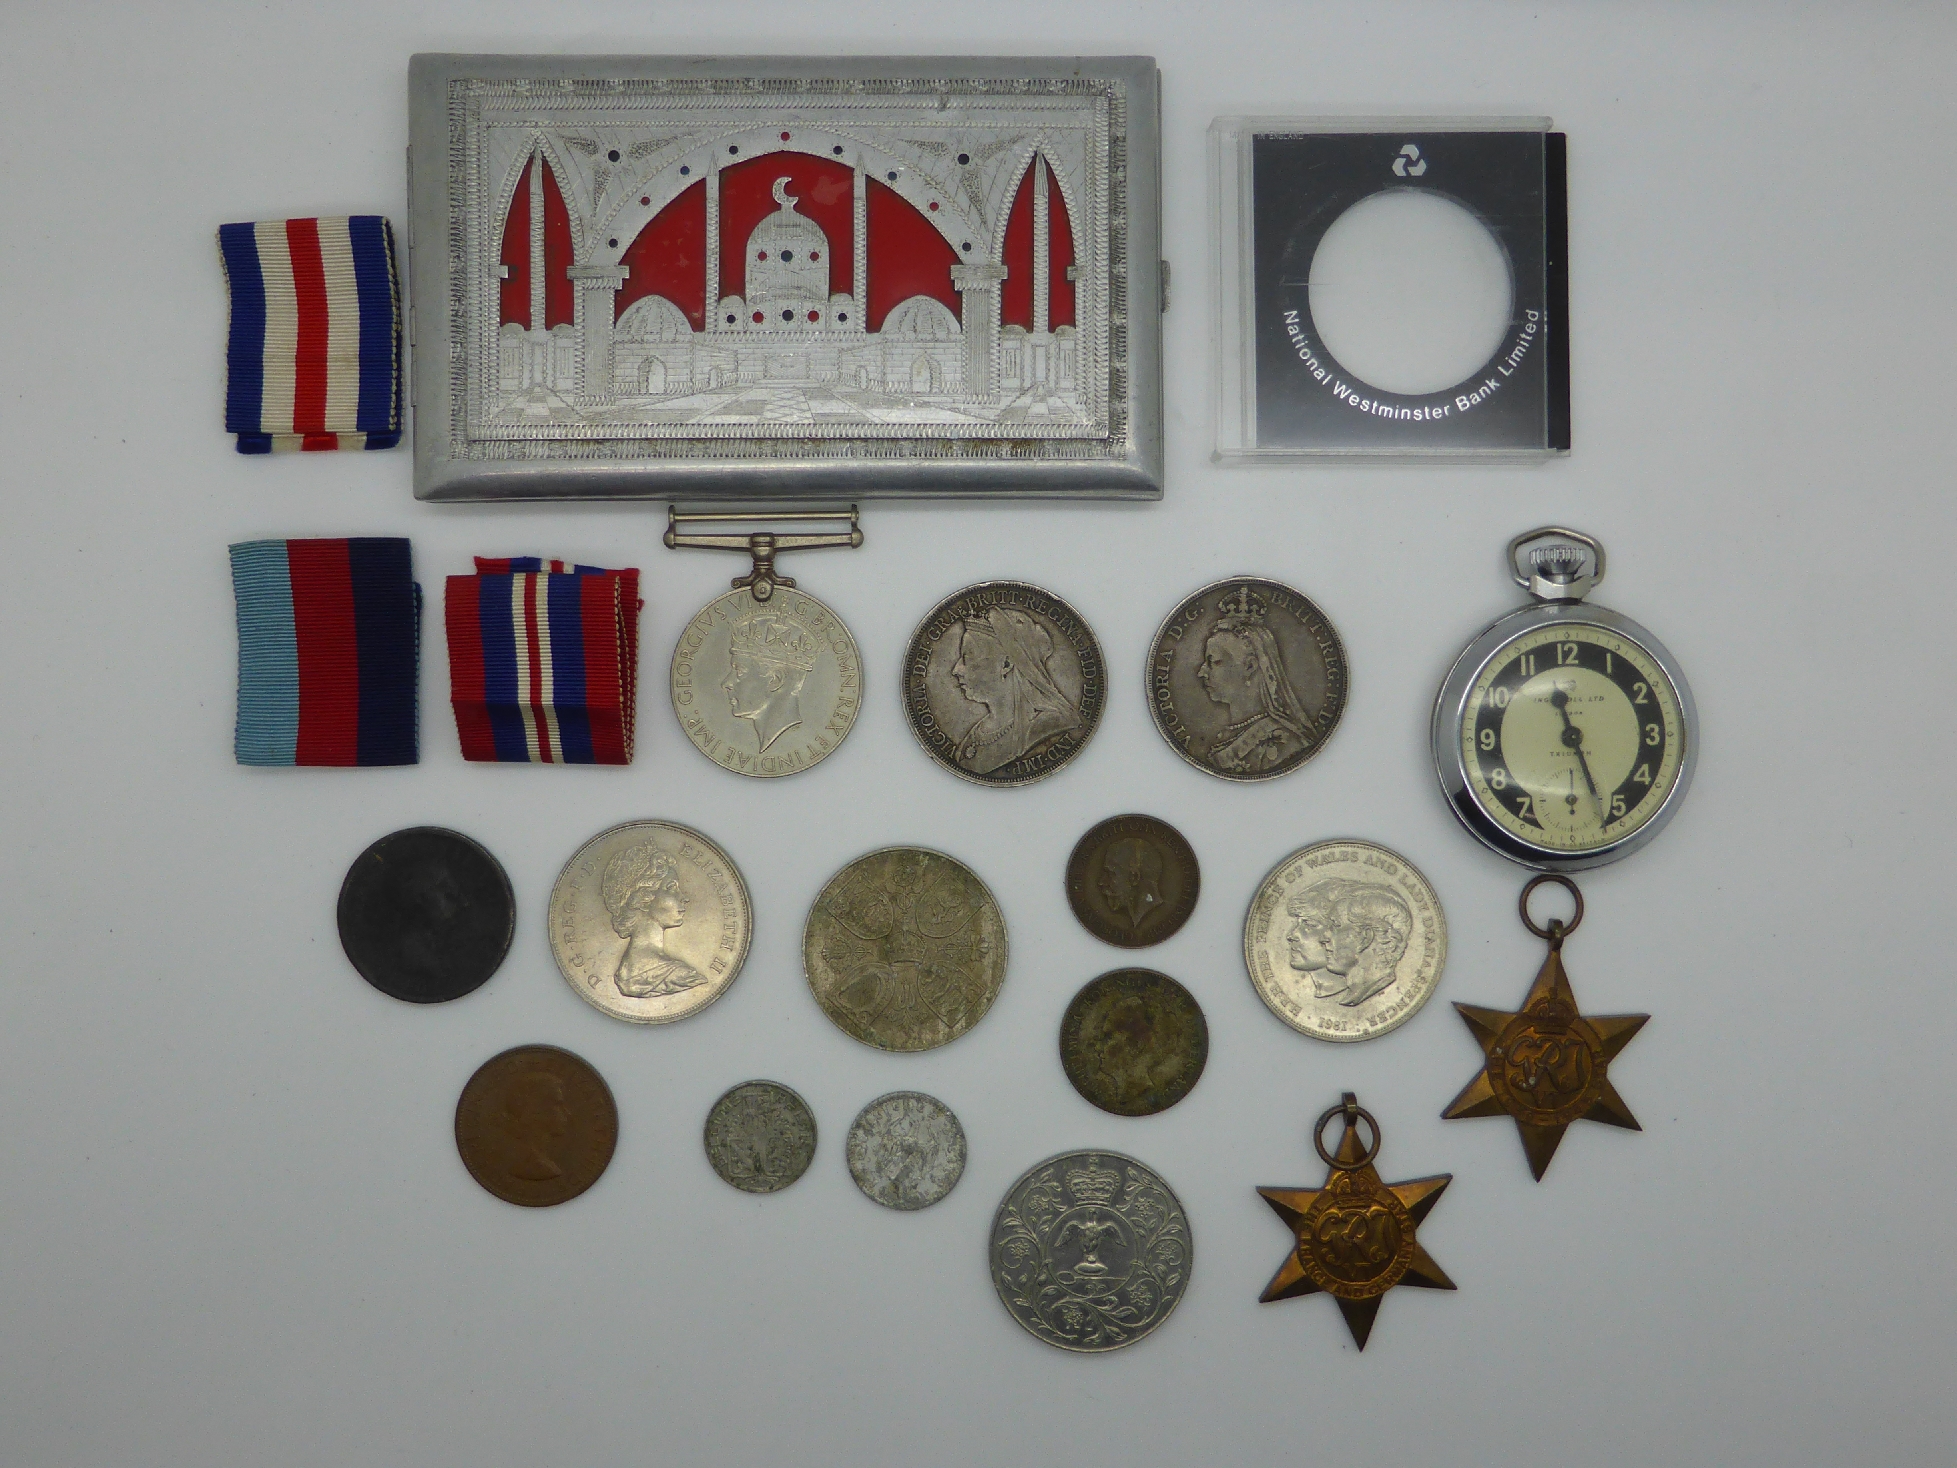 British Army WWII medals group awarded to Ivor Gardner, Paganhill, Stroud, comprising 1939/1945